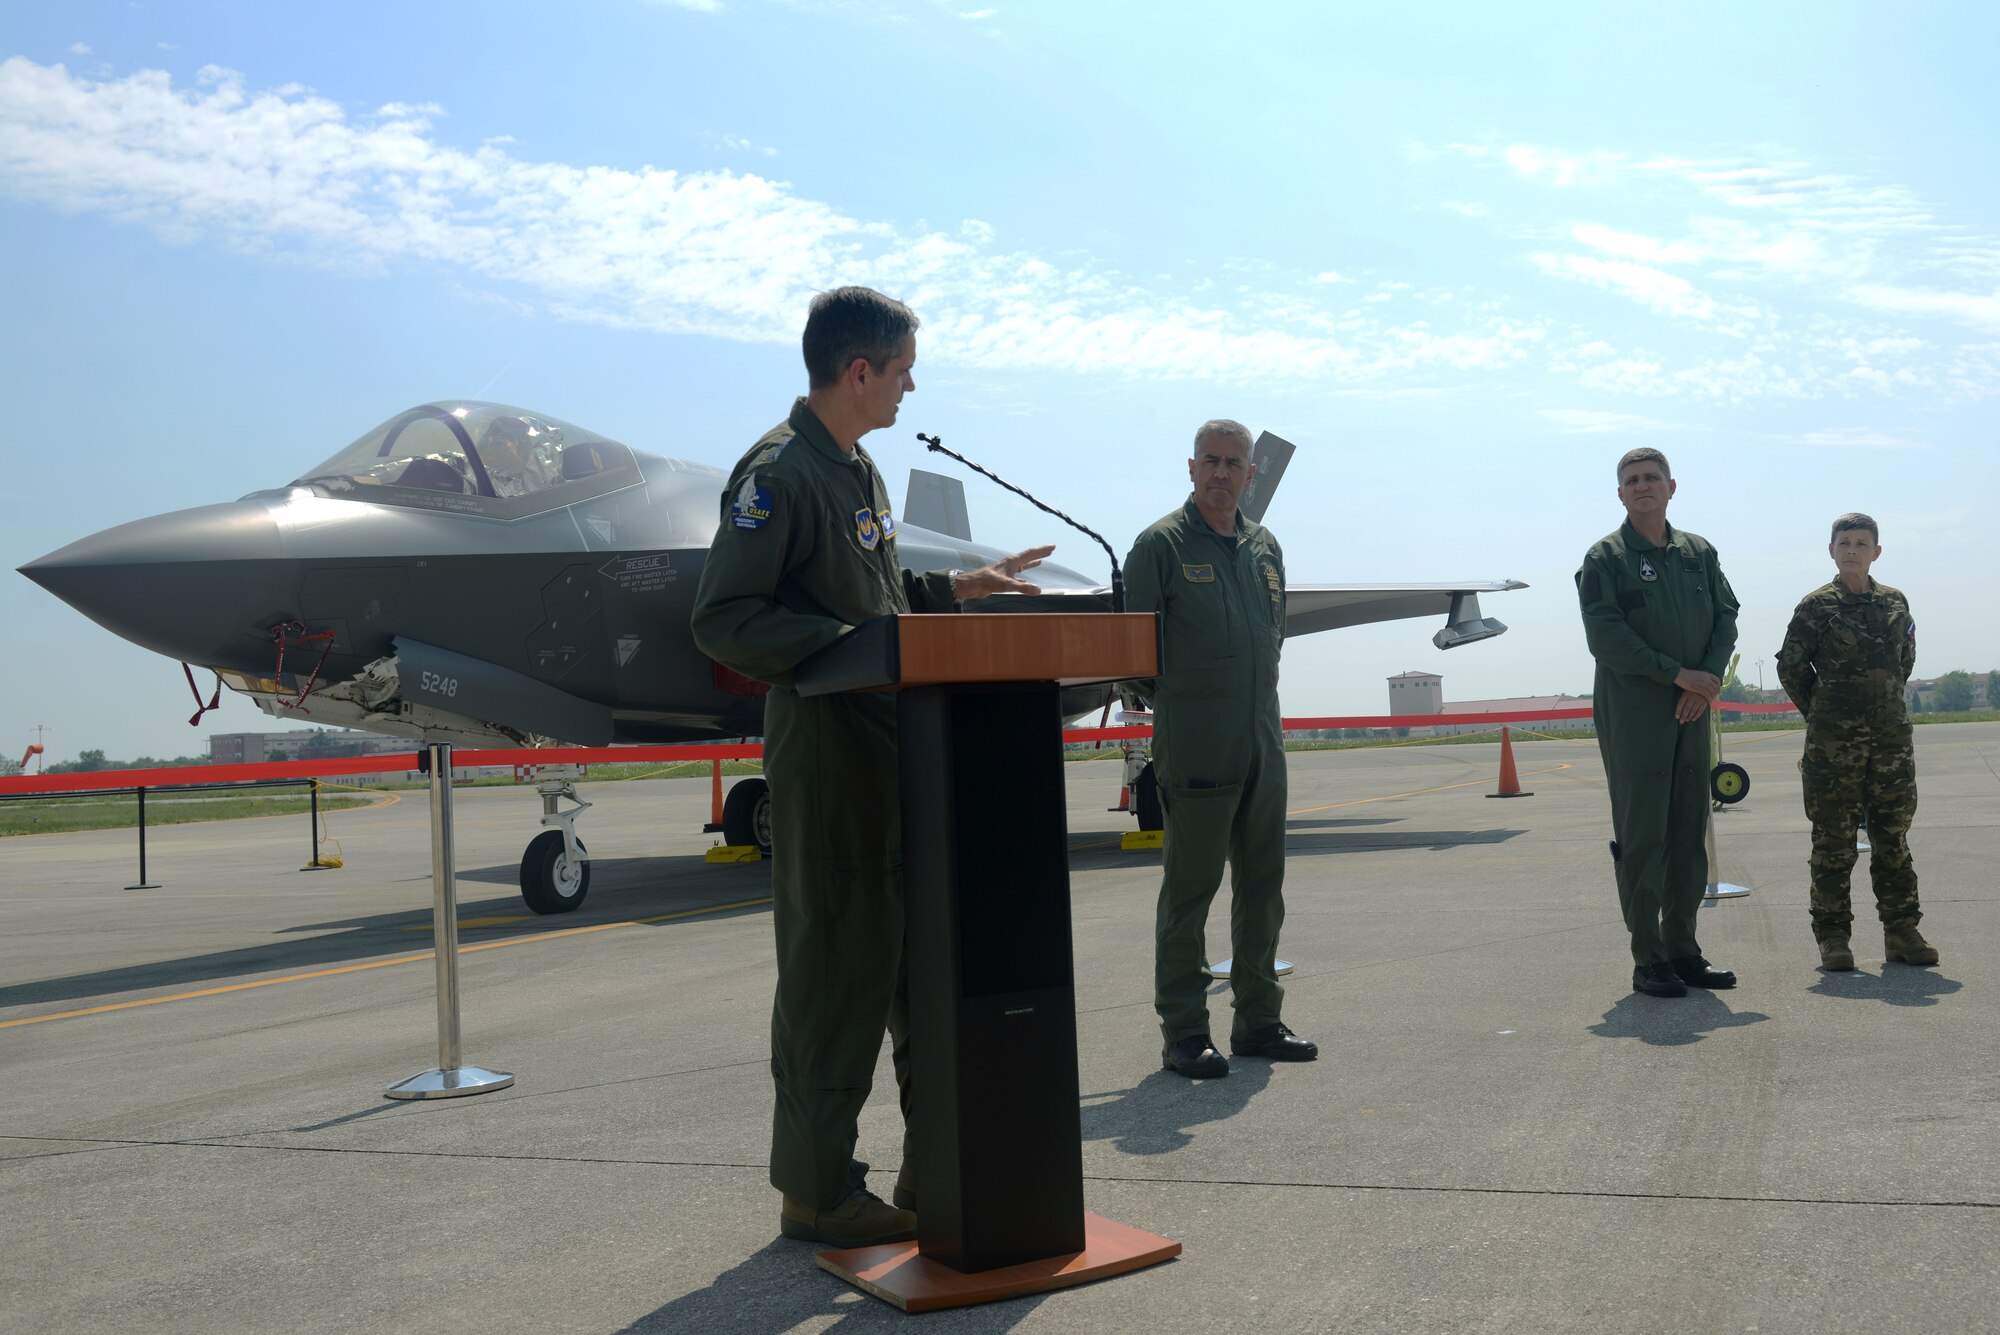 Senior Leaders, Italian Air Force Maj. Gen. Silvano Frigerio, Combat Force Command commander, U.S. Air Force Lt. Gen. Steven Basham, U.S Air Forces Europe and Air Forces Africa deputy commander, Brig. Gen. Mato Mikic, Croatian Air Force commander, and Maj. Gen. Alenka Ermenc, Slovenia Air Force chief of the general staff, visited Aviano Air Base, Italy as part of Astral Knight 2019, June 4. The Senior Leaders visited Aviano as part of the first U.S. Air Forces in Europe-sponsored integrated air and missile defense exercise taking place at various locations in Italy, Croatia and Slovenia. (U.S. Air Force photo by Airman 1st Class Ericka A. Dechane).